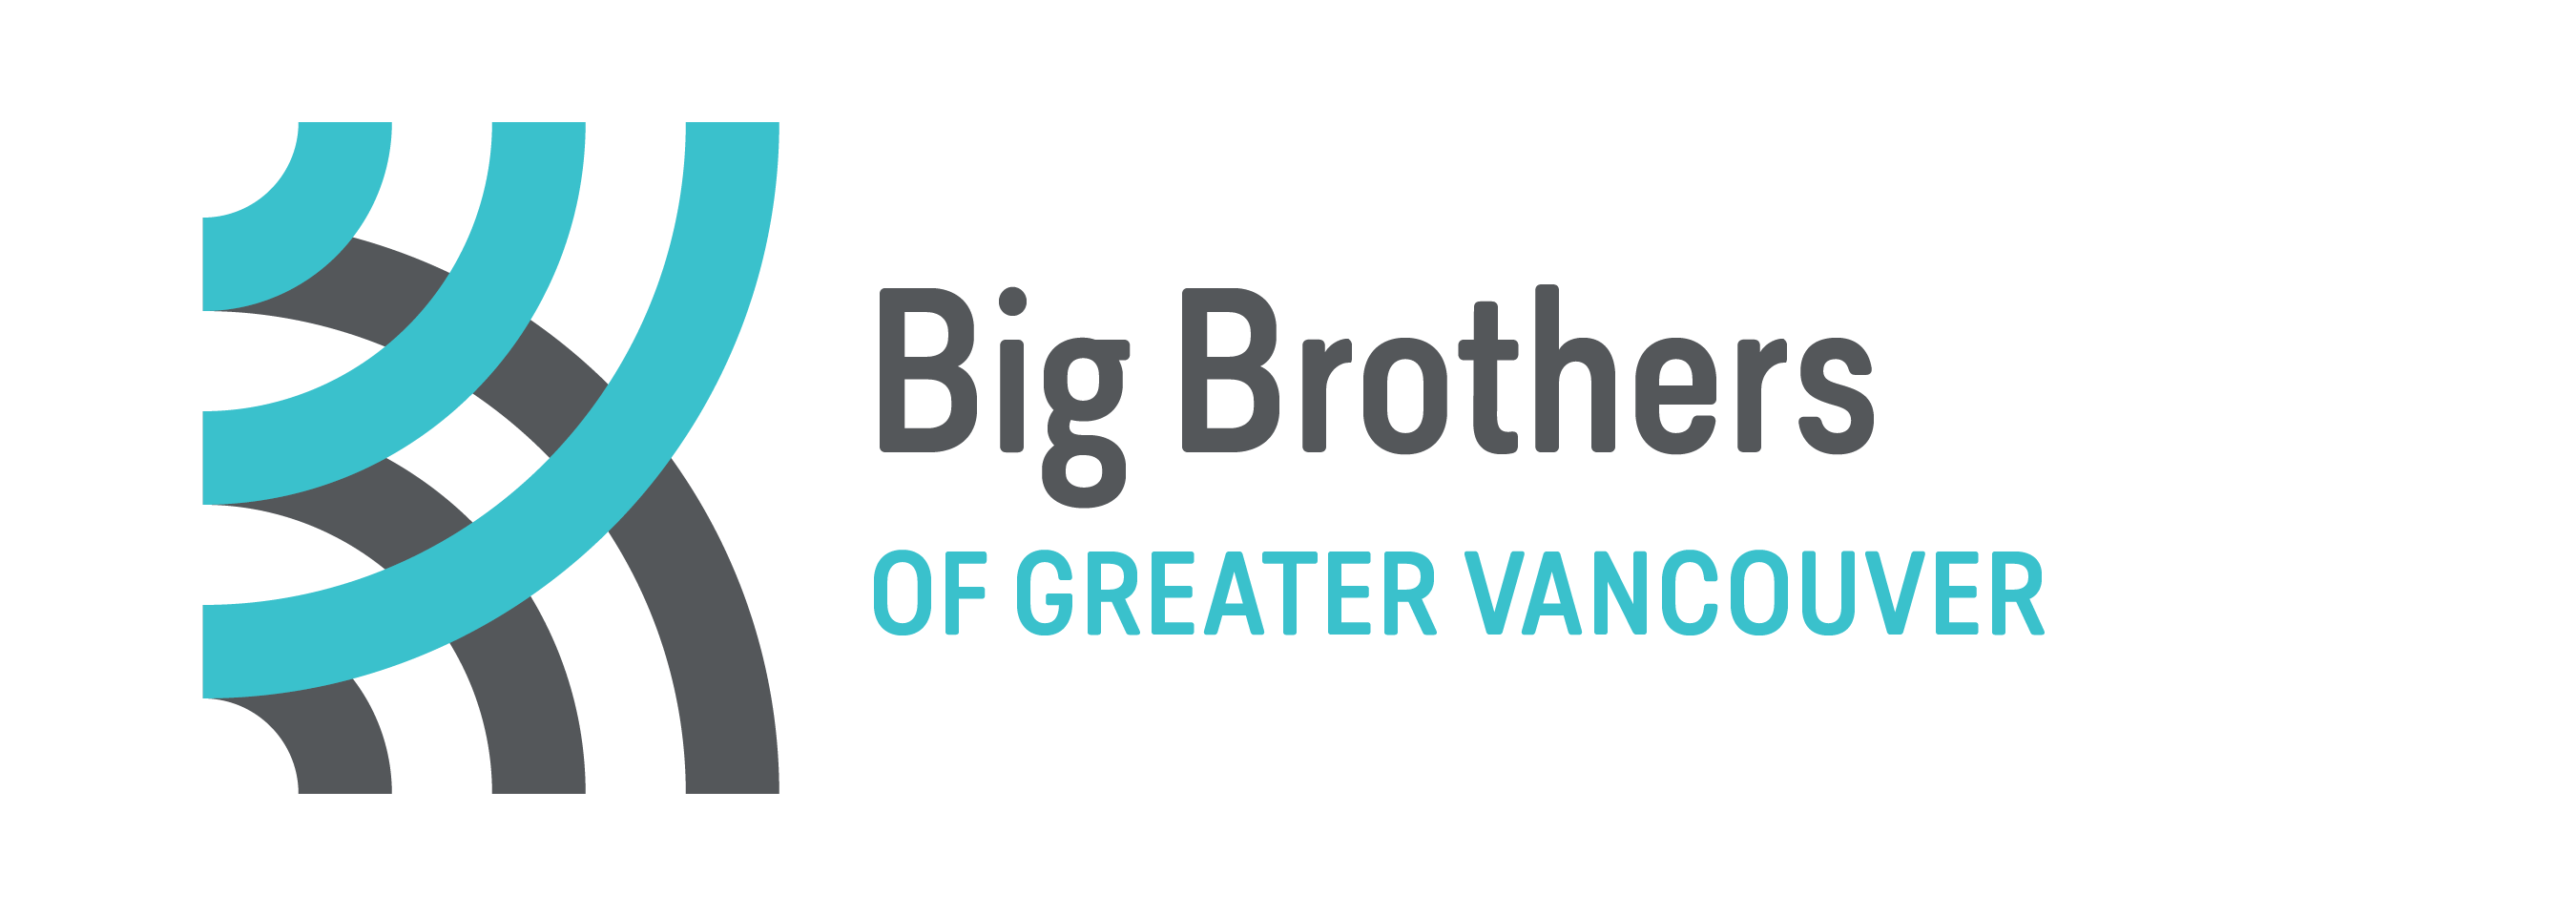 BIG BROTHERS OF GREATER VANCOUVER FOUNDATION logo